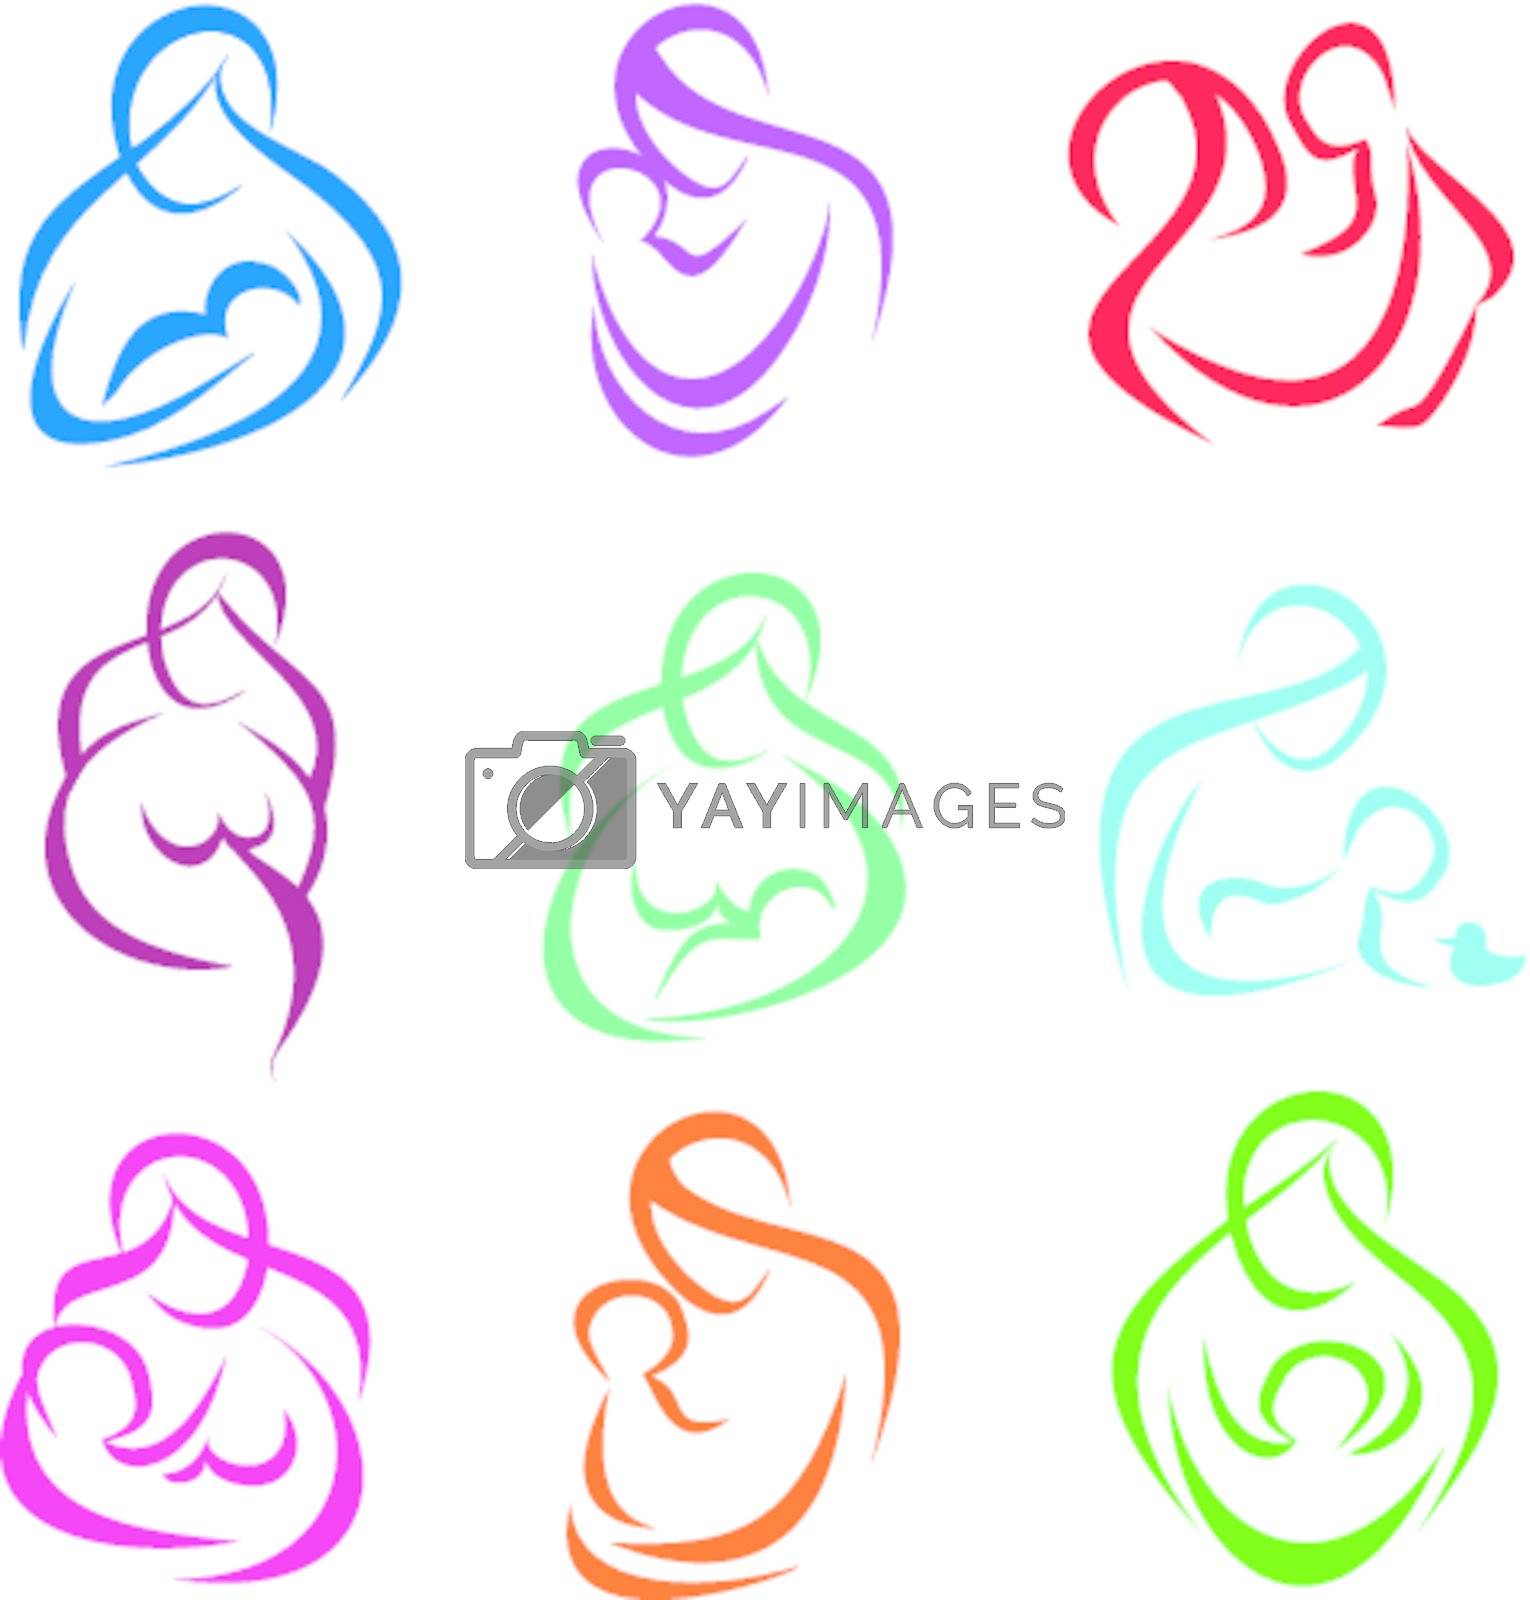 Royalty free image of mother and child set of symbols, pregnancy, parenthood concept by baldyrgan